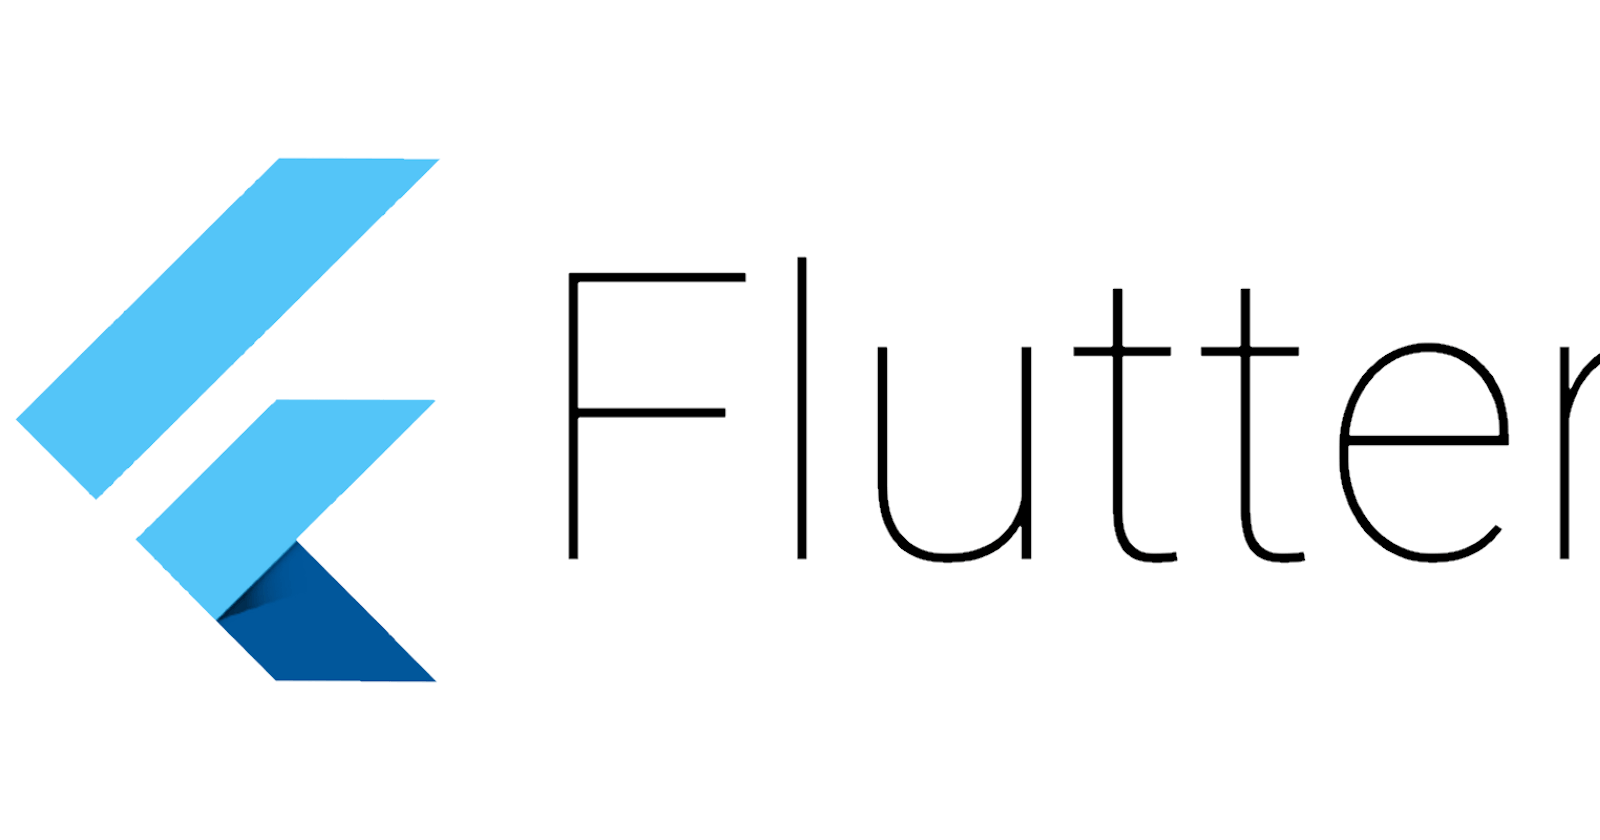 Creating a simple Ping-Pong game using Flutter CustomPainter and Explicit animations